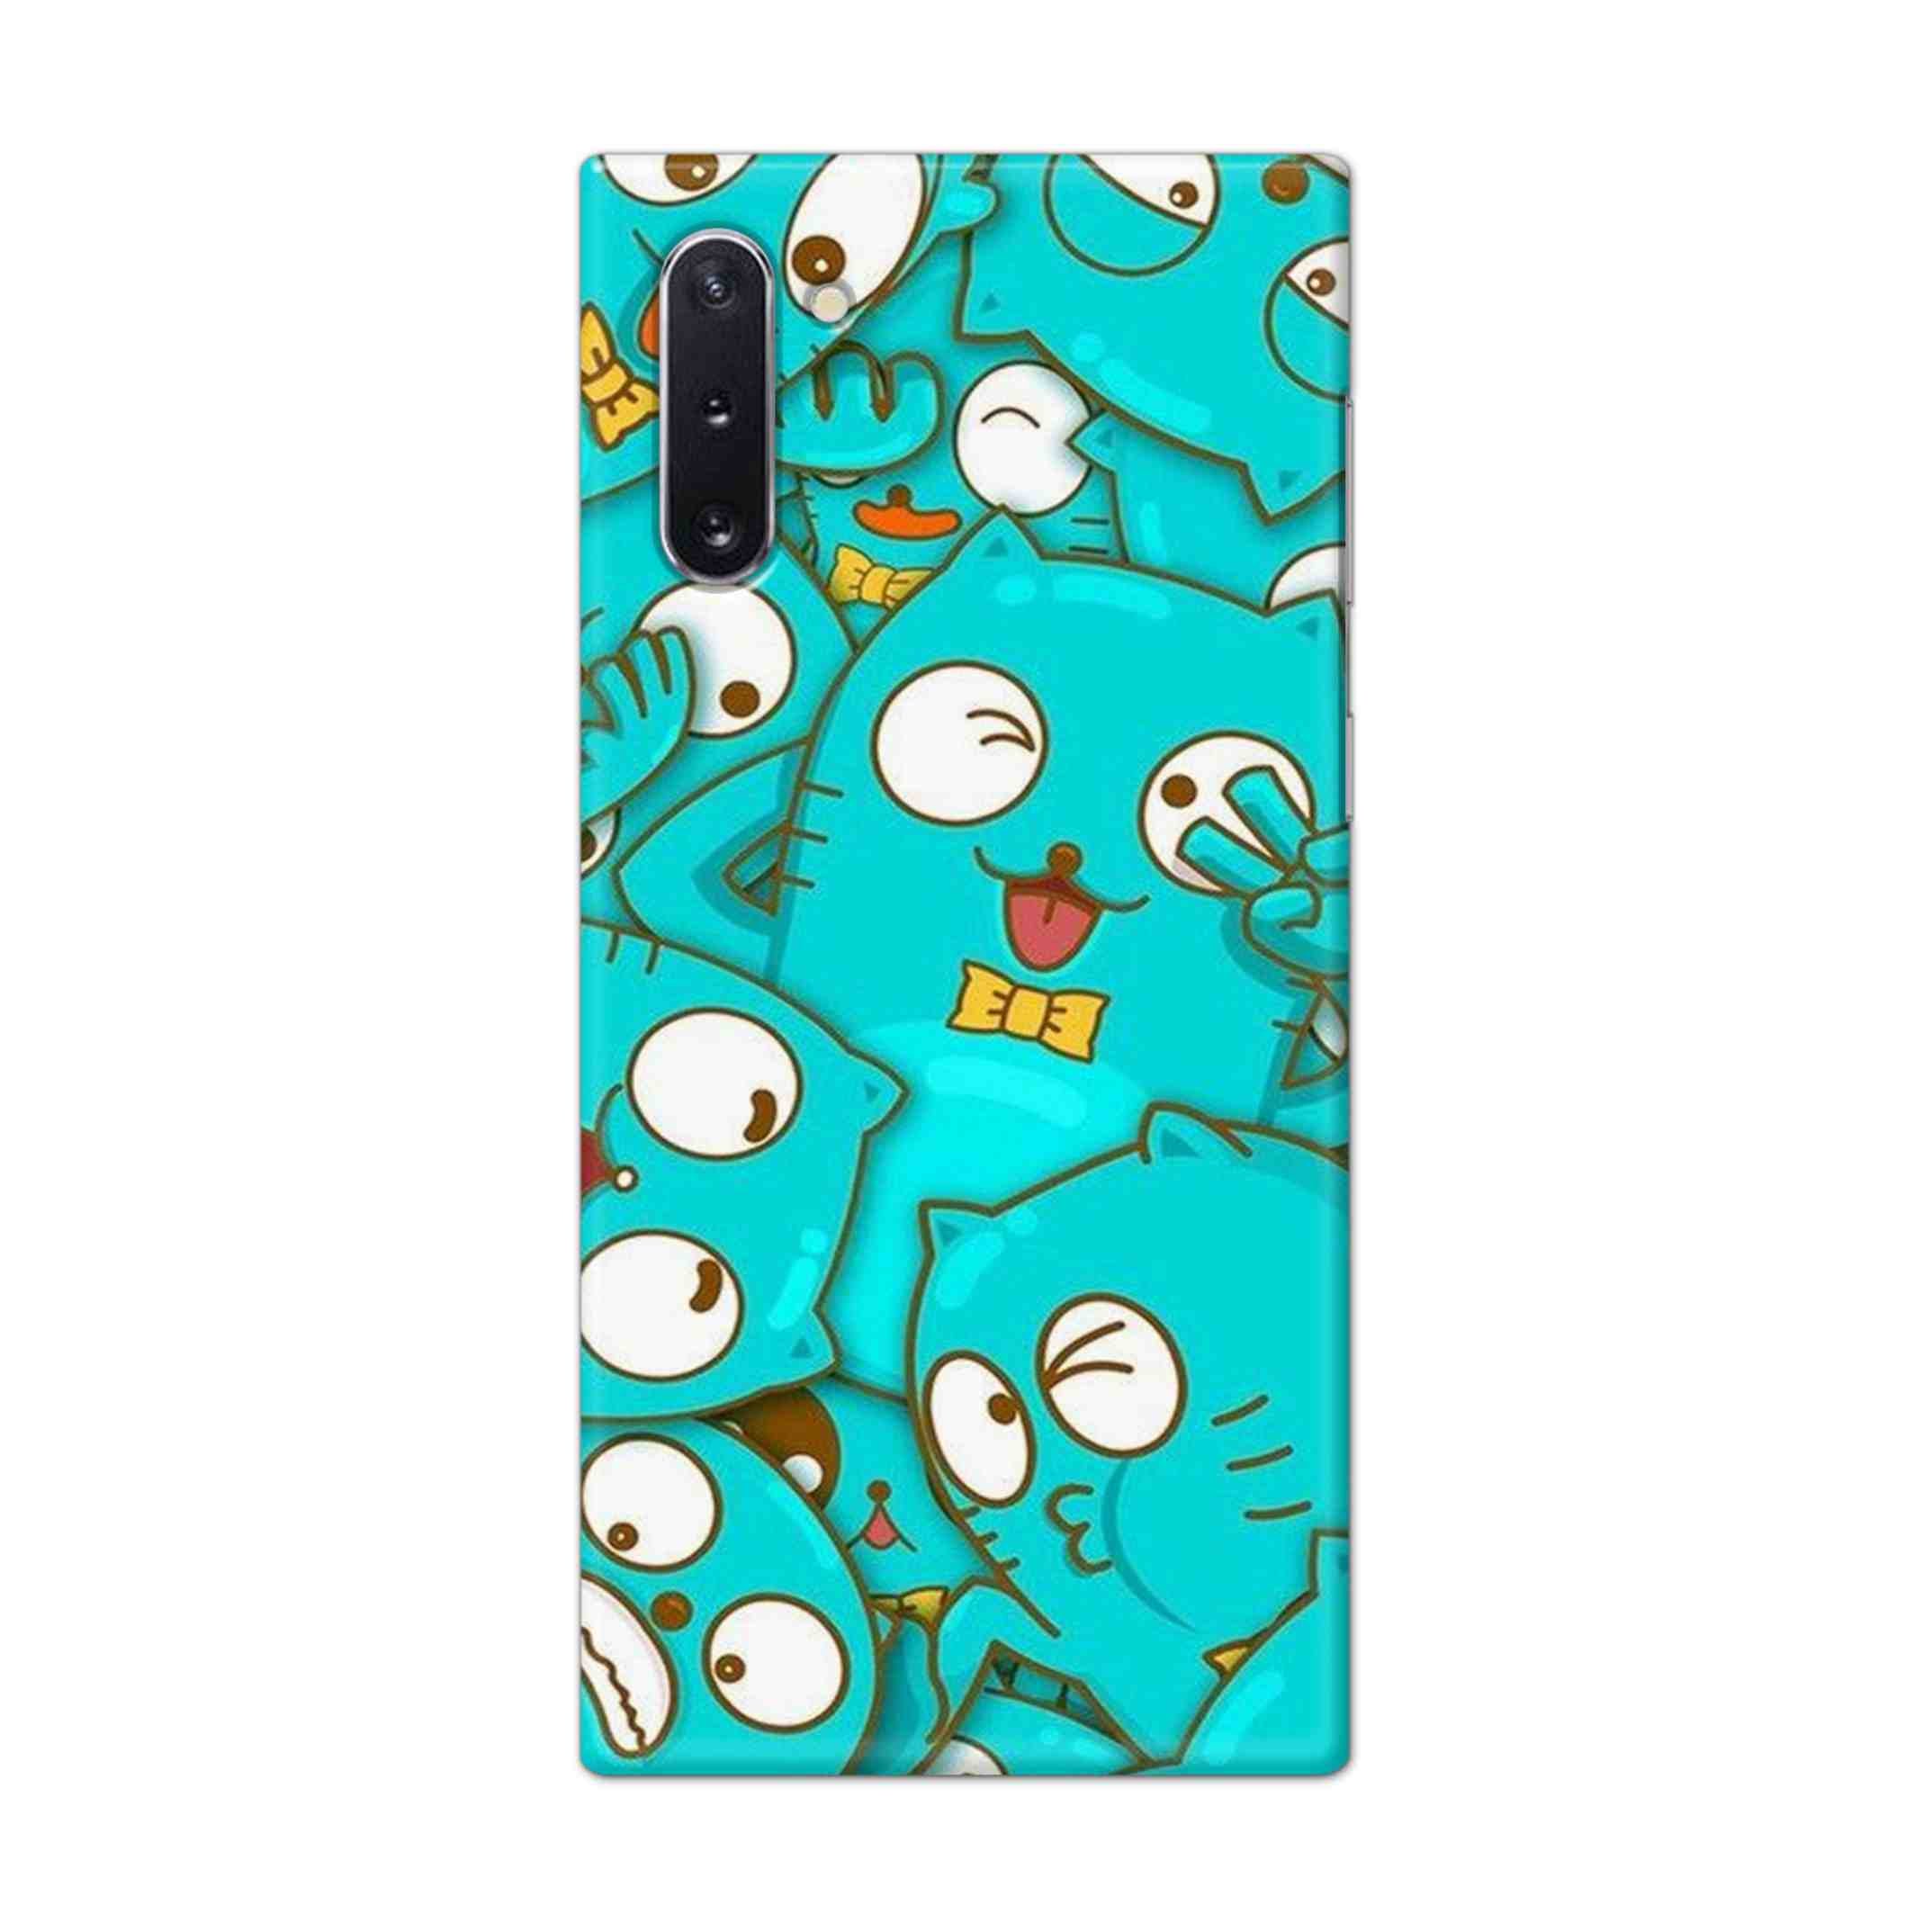 Buy Cat Hard Back Mobile Phone Case Cover For Samsung Galaxy Note 10 Online